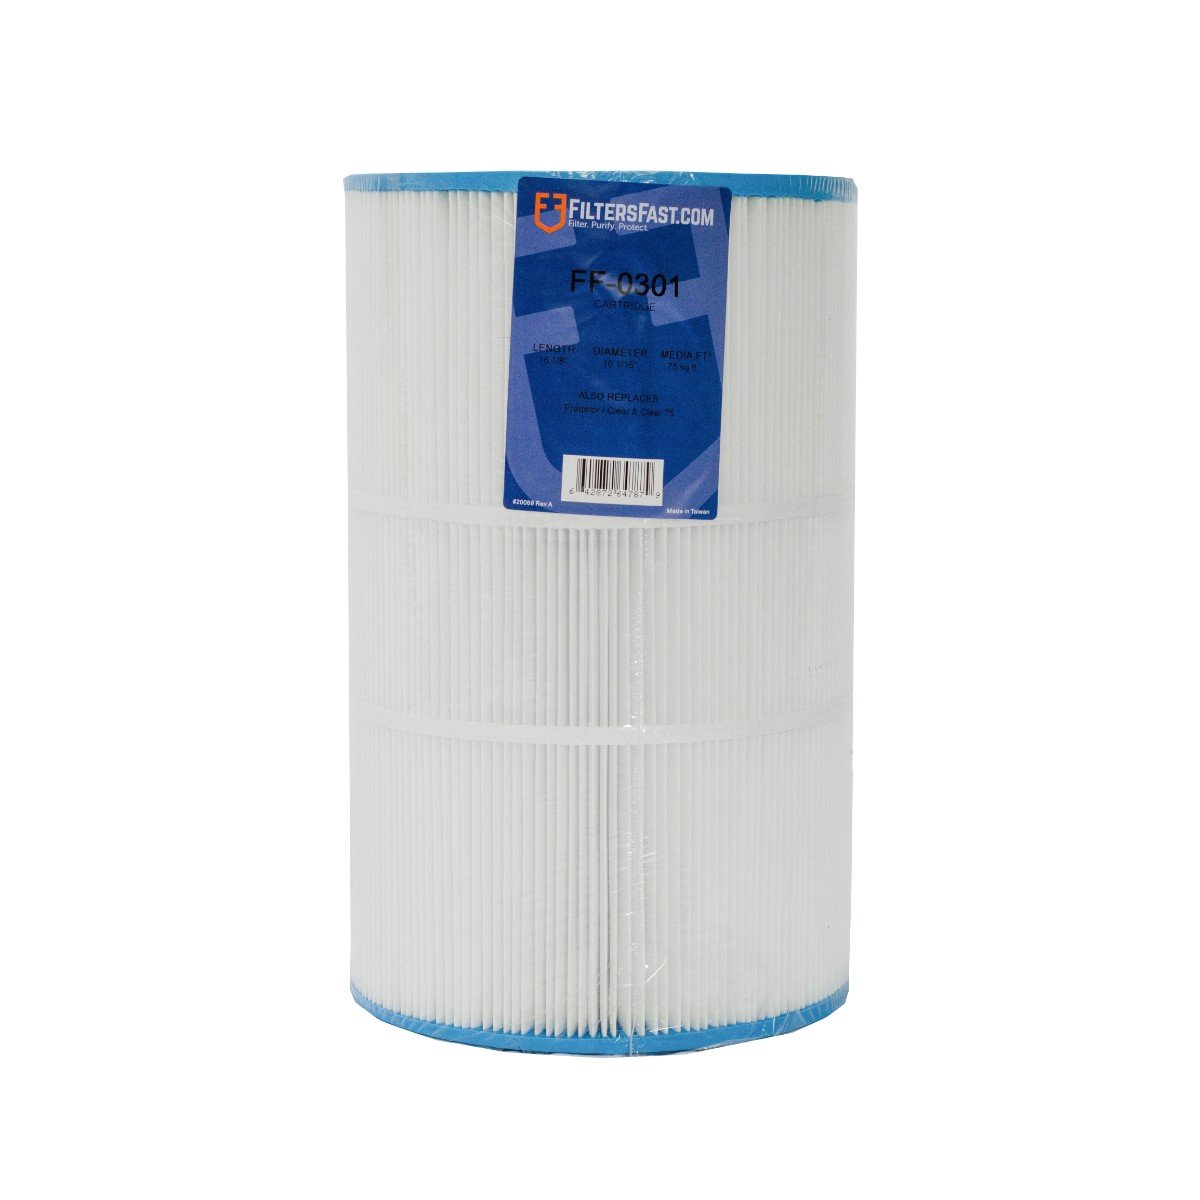 Filters Fast&reg; FF-0301 Replacement For Pentair 59054100